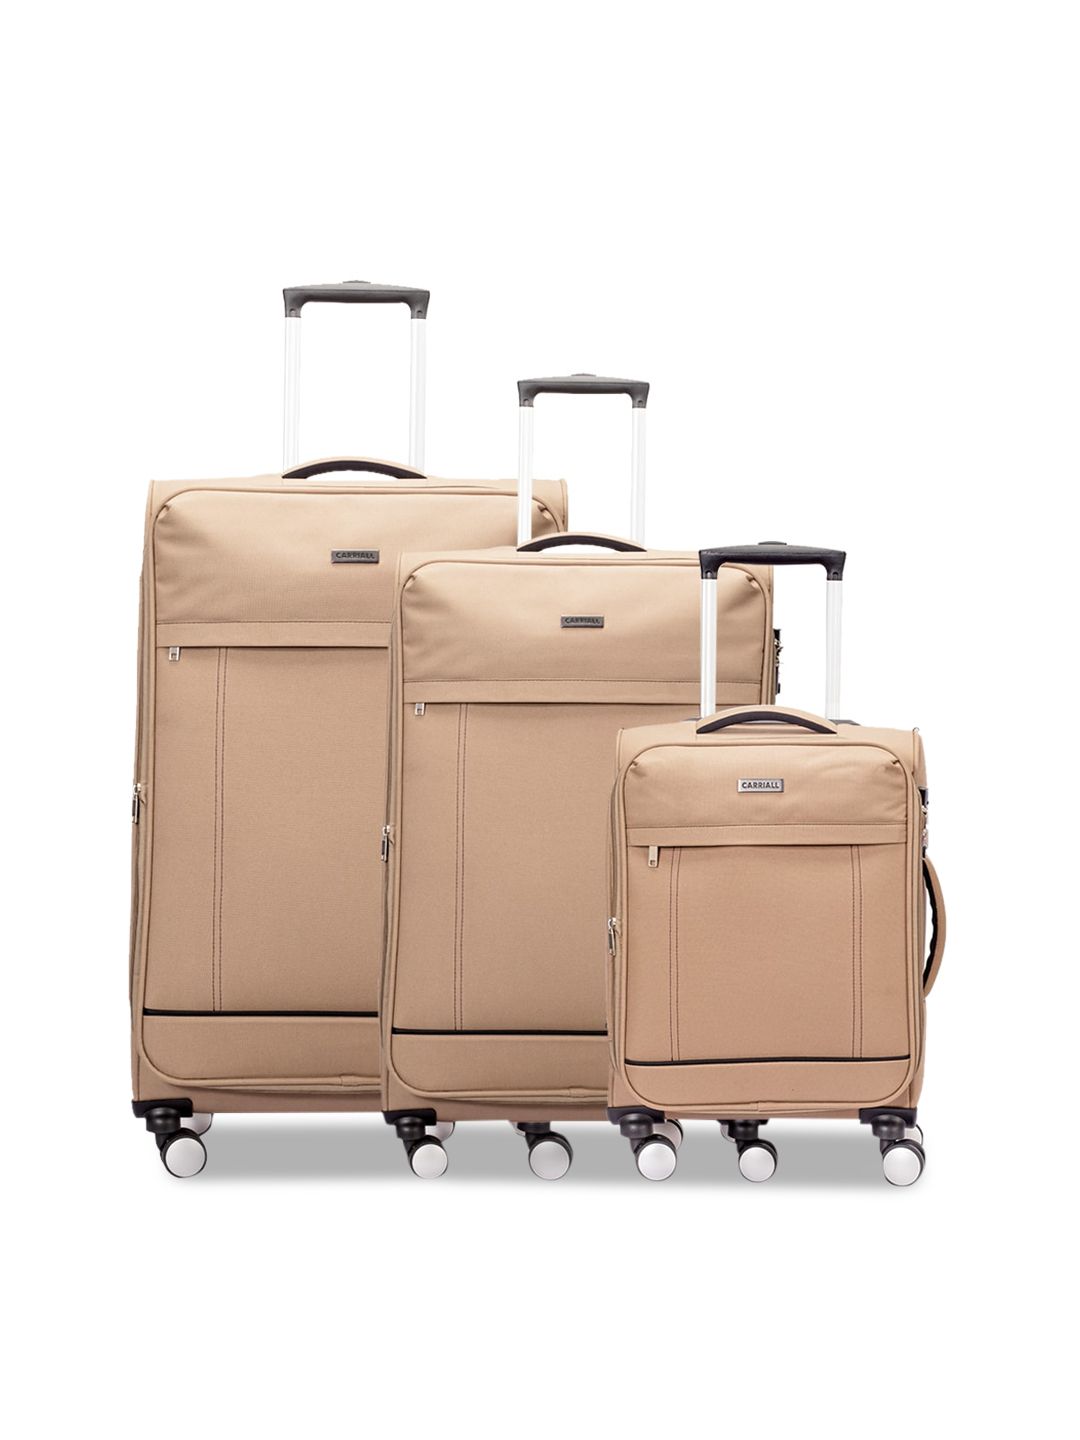 CARRIALL Beige Set Of 3 Solid Soft-Sided Trolley Suitcases Price in India